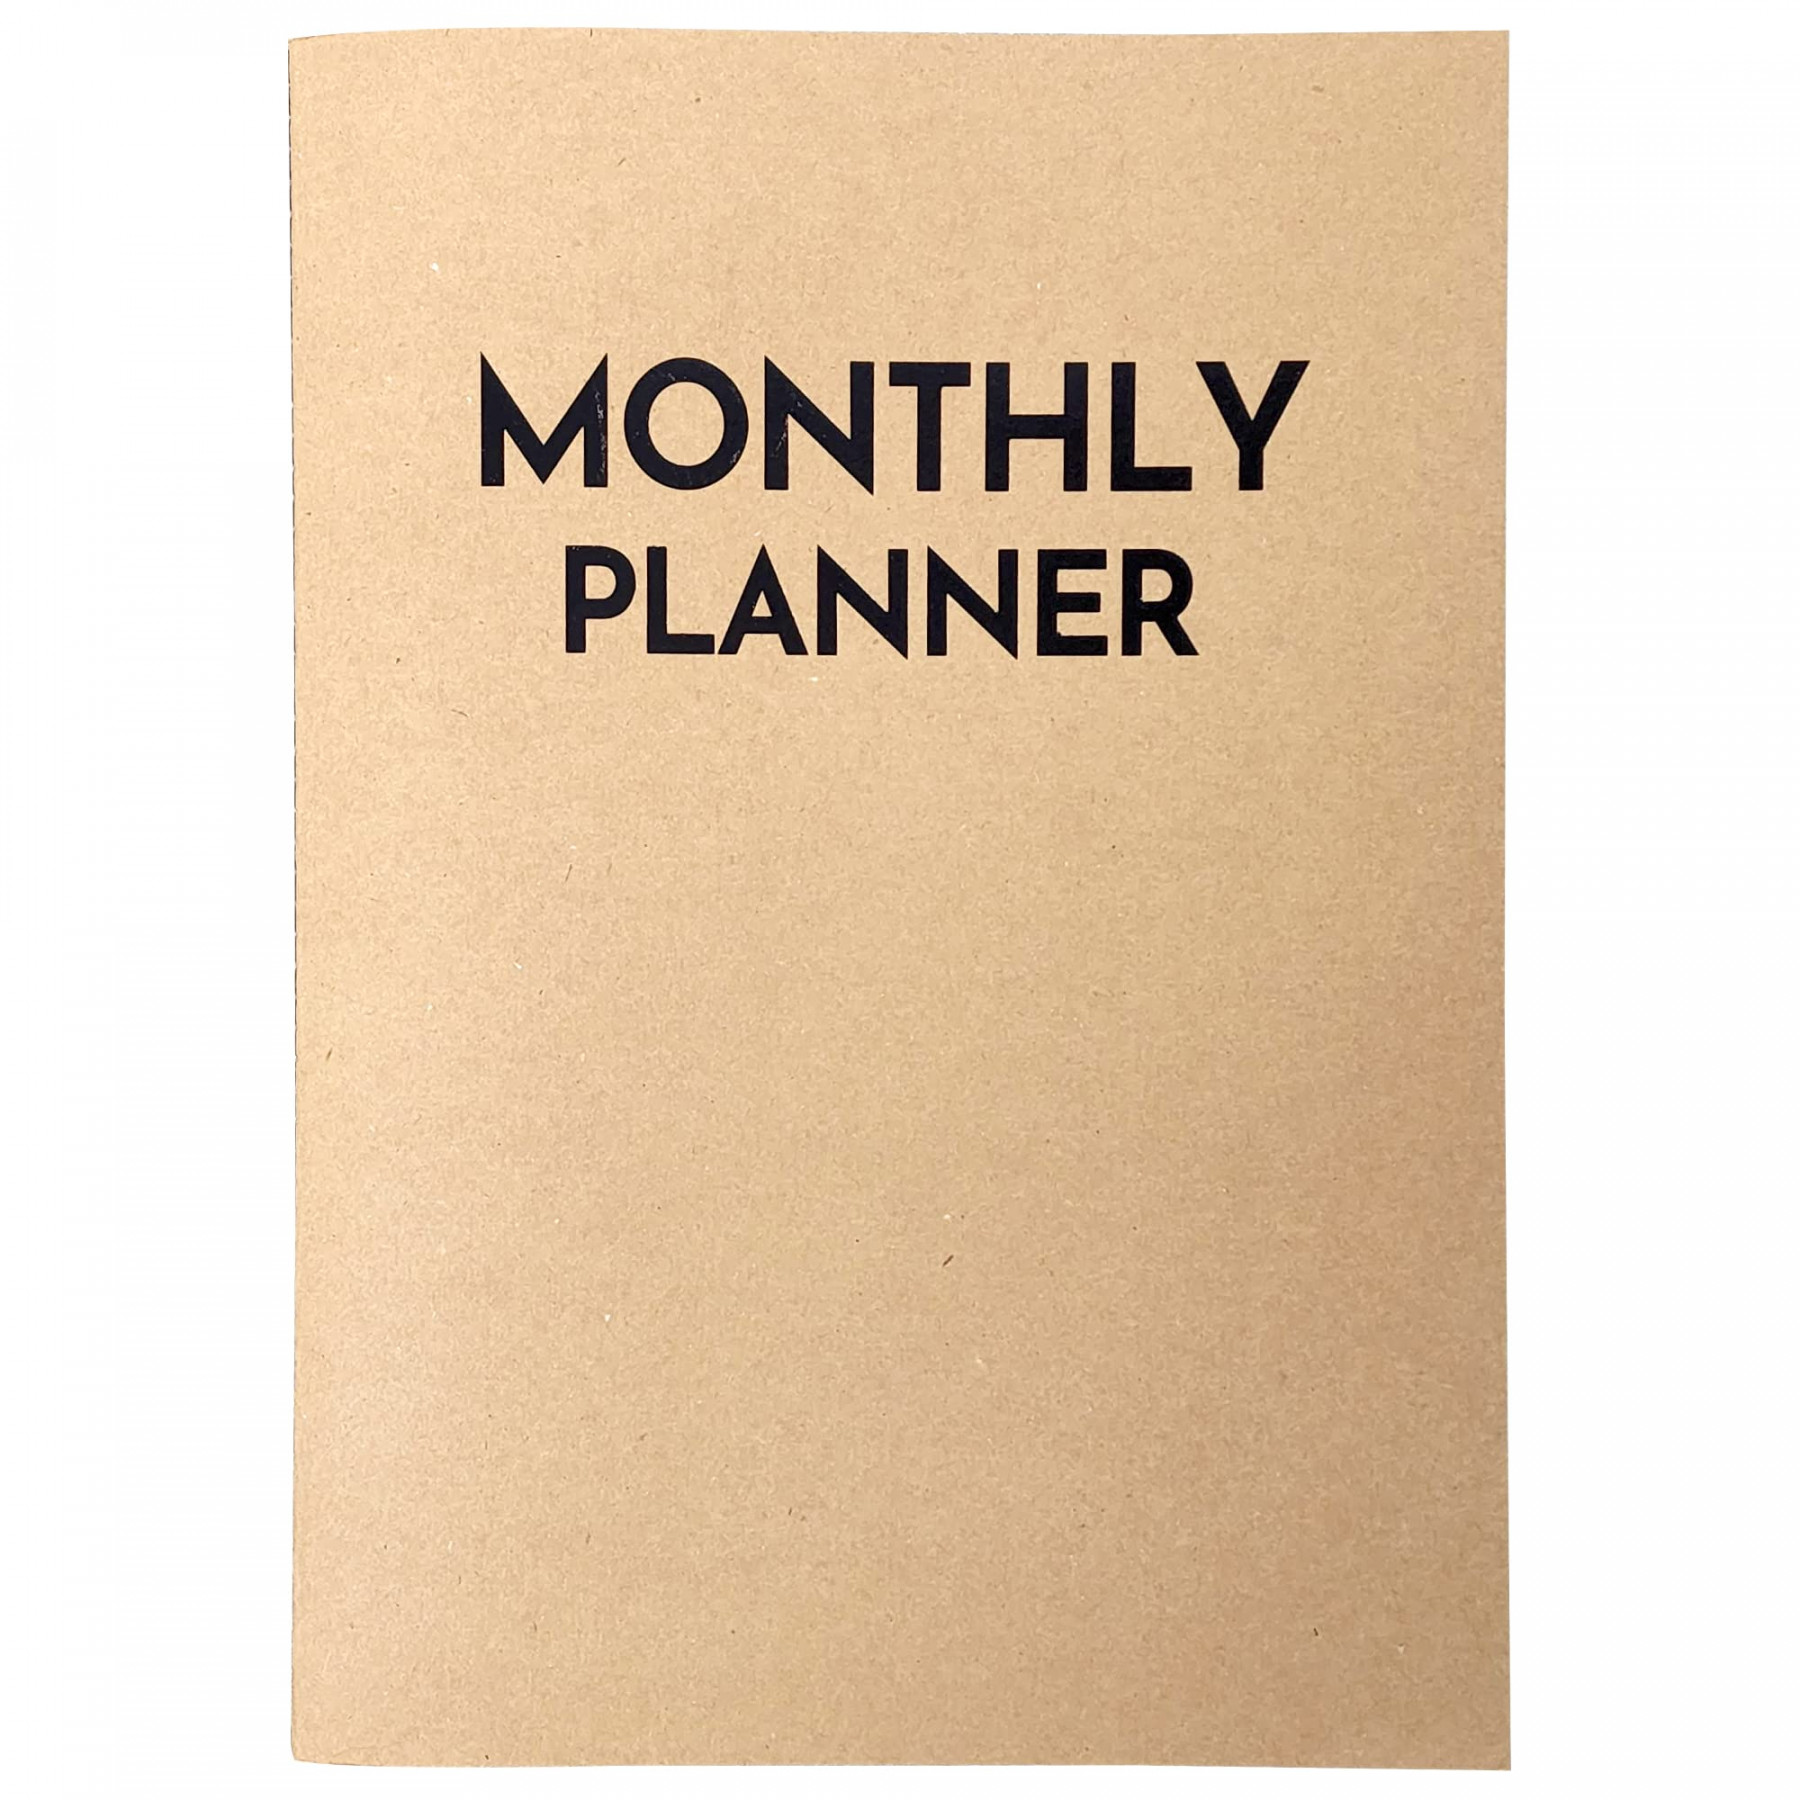 Undated Big Monthly Planner - - Blank Calendar Book and Organizers   x  Inches - Kraft